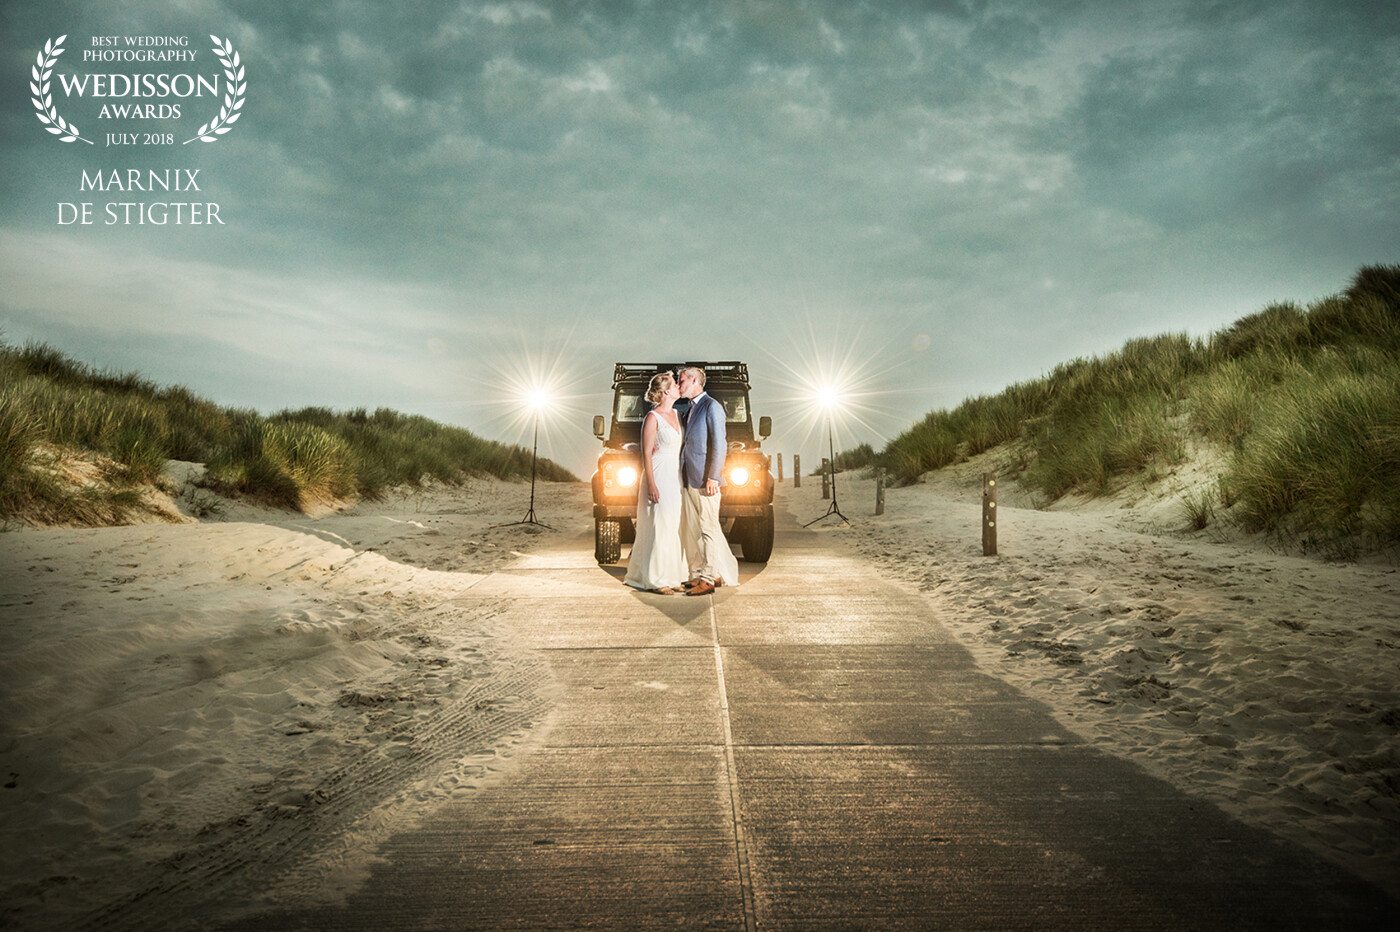 We were hoping for a beautiful sunset at the beach, but unfortunately it was totally overcast that day. Since they had a really bad-ass Defender (in which the bride herself drove bare-feet in her wedding dress) I thought taking this shot fit the moment really well.